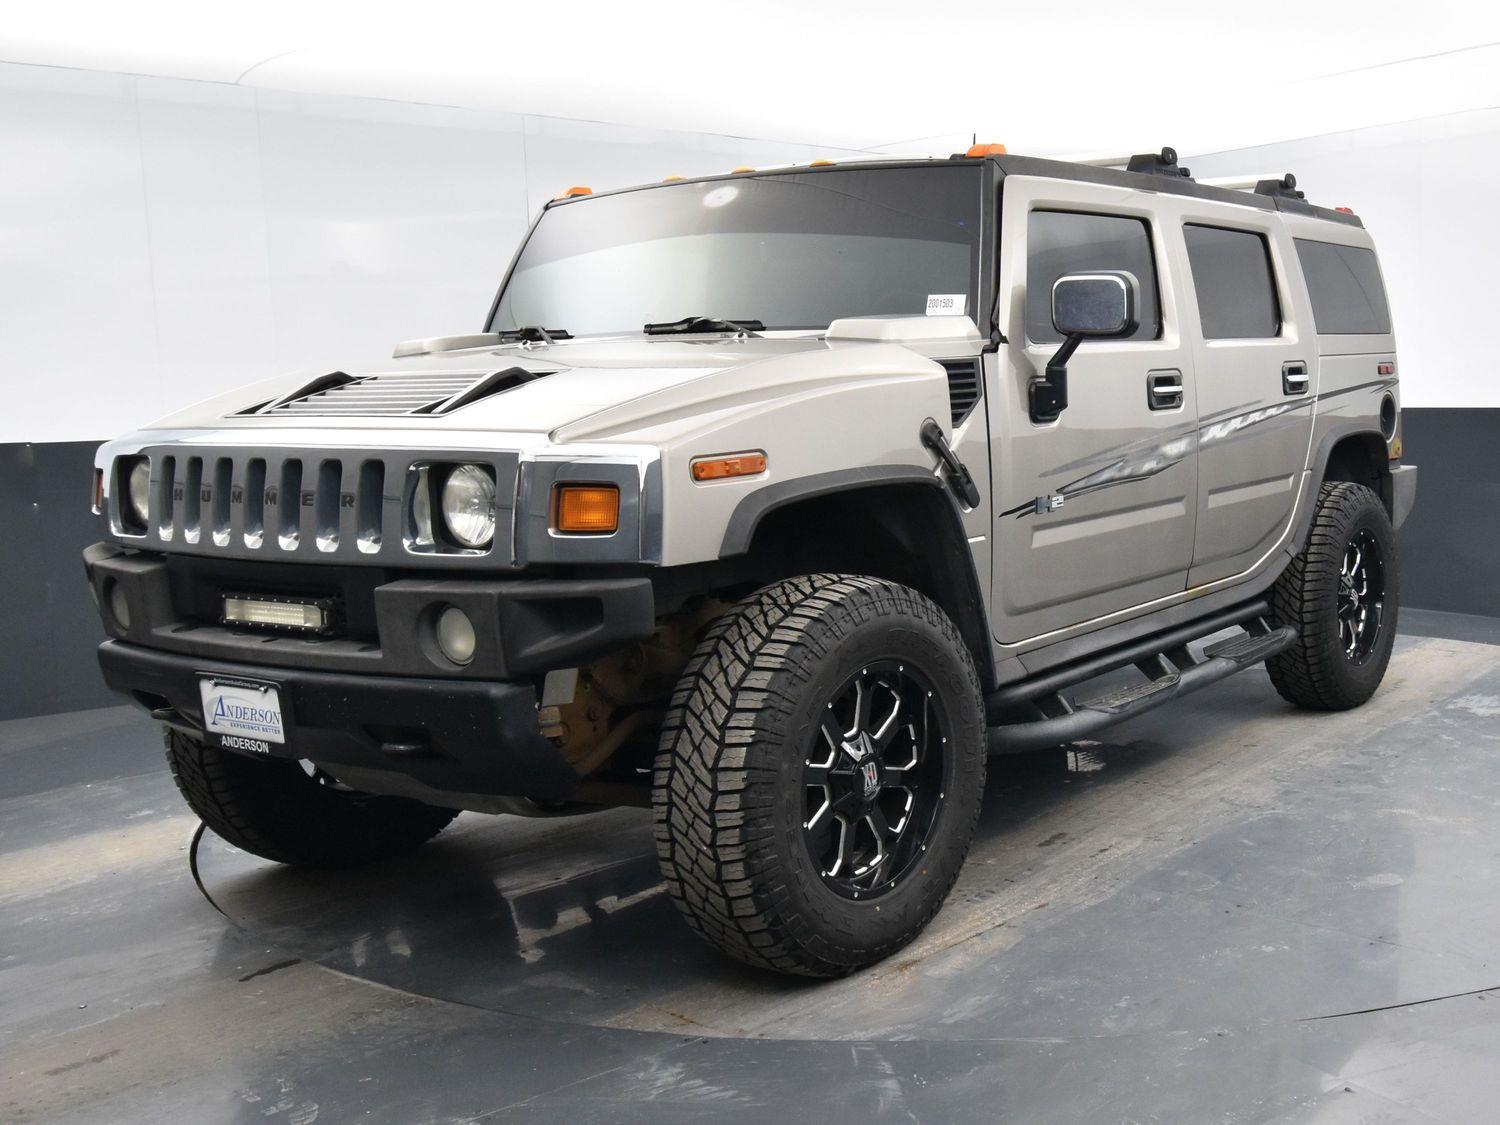 Used 2004 HUMMER H2  4 Door Wagon for sale in Grand Island NE